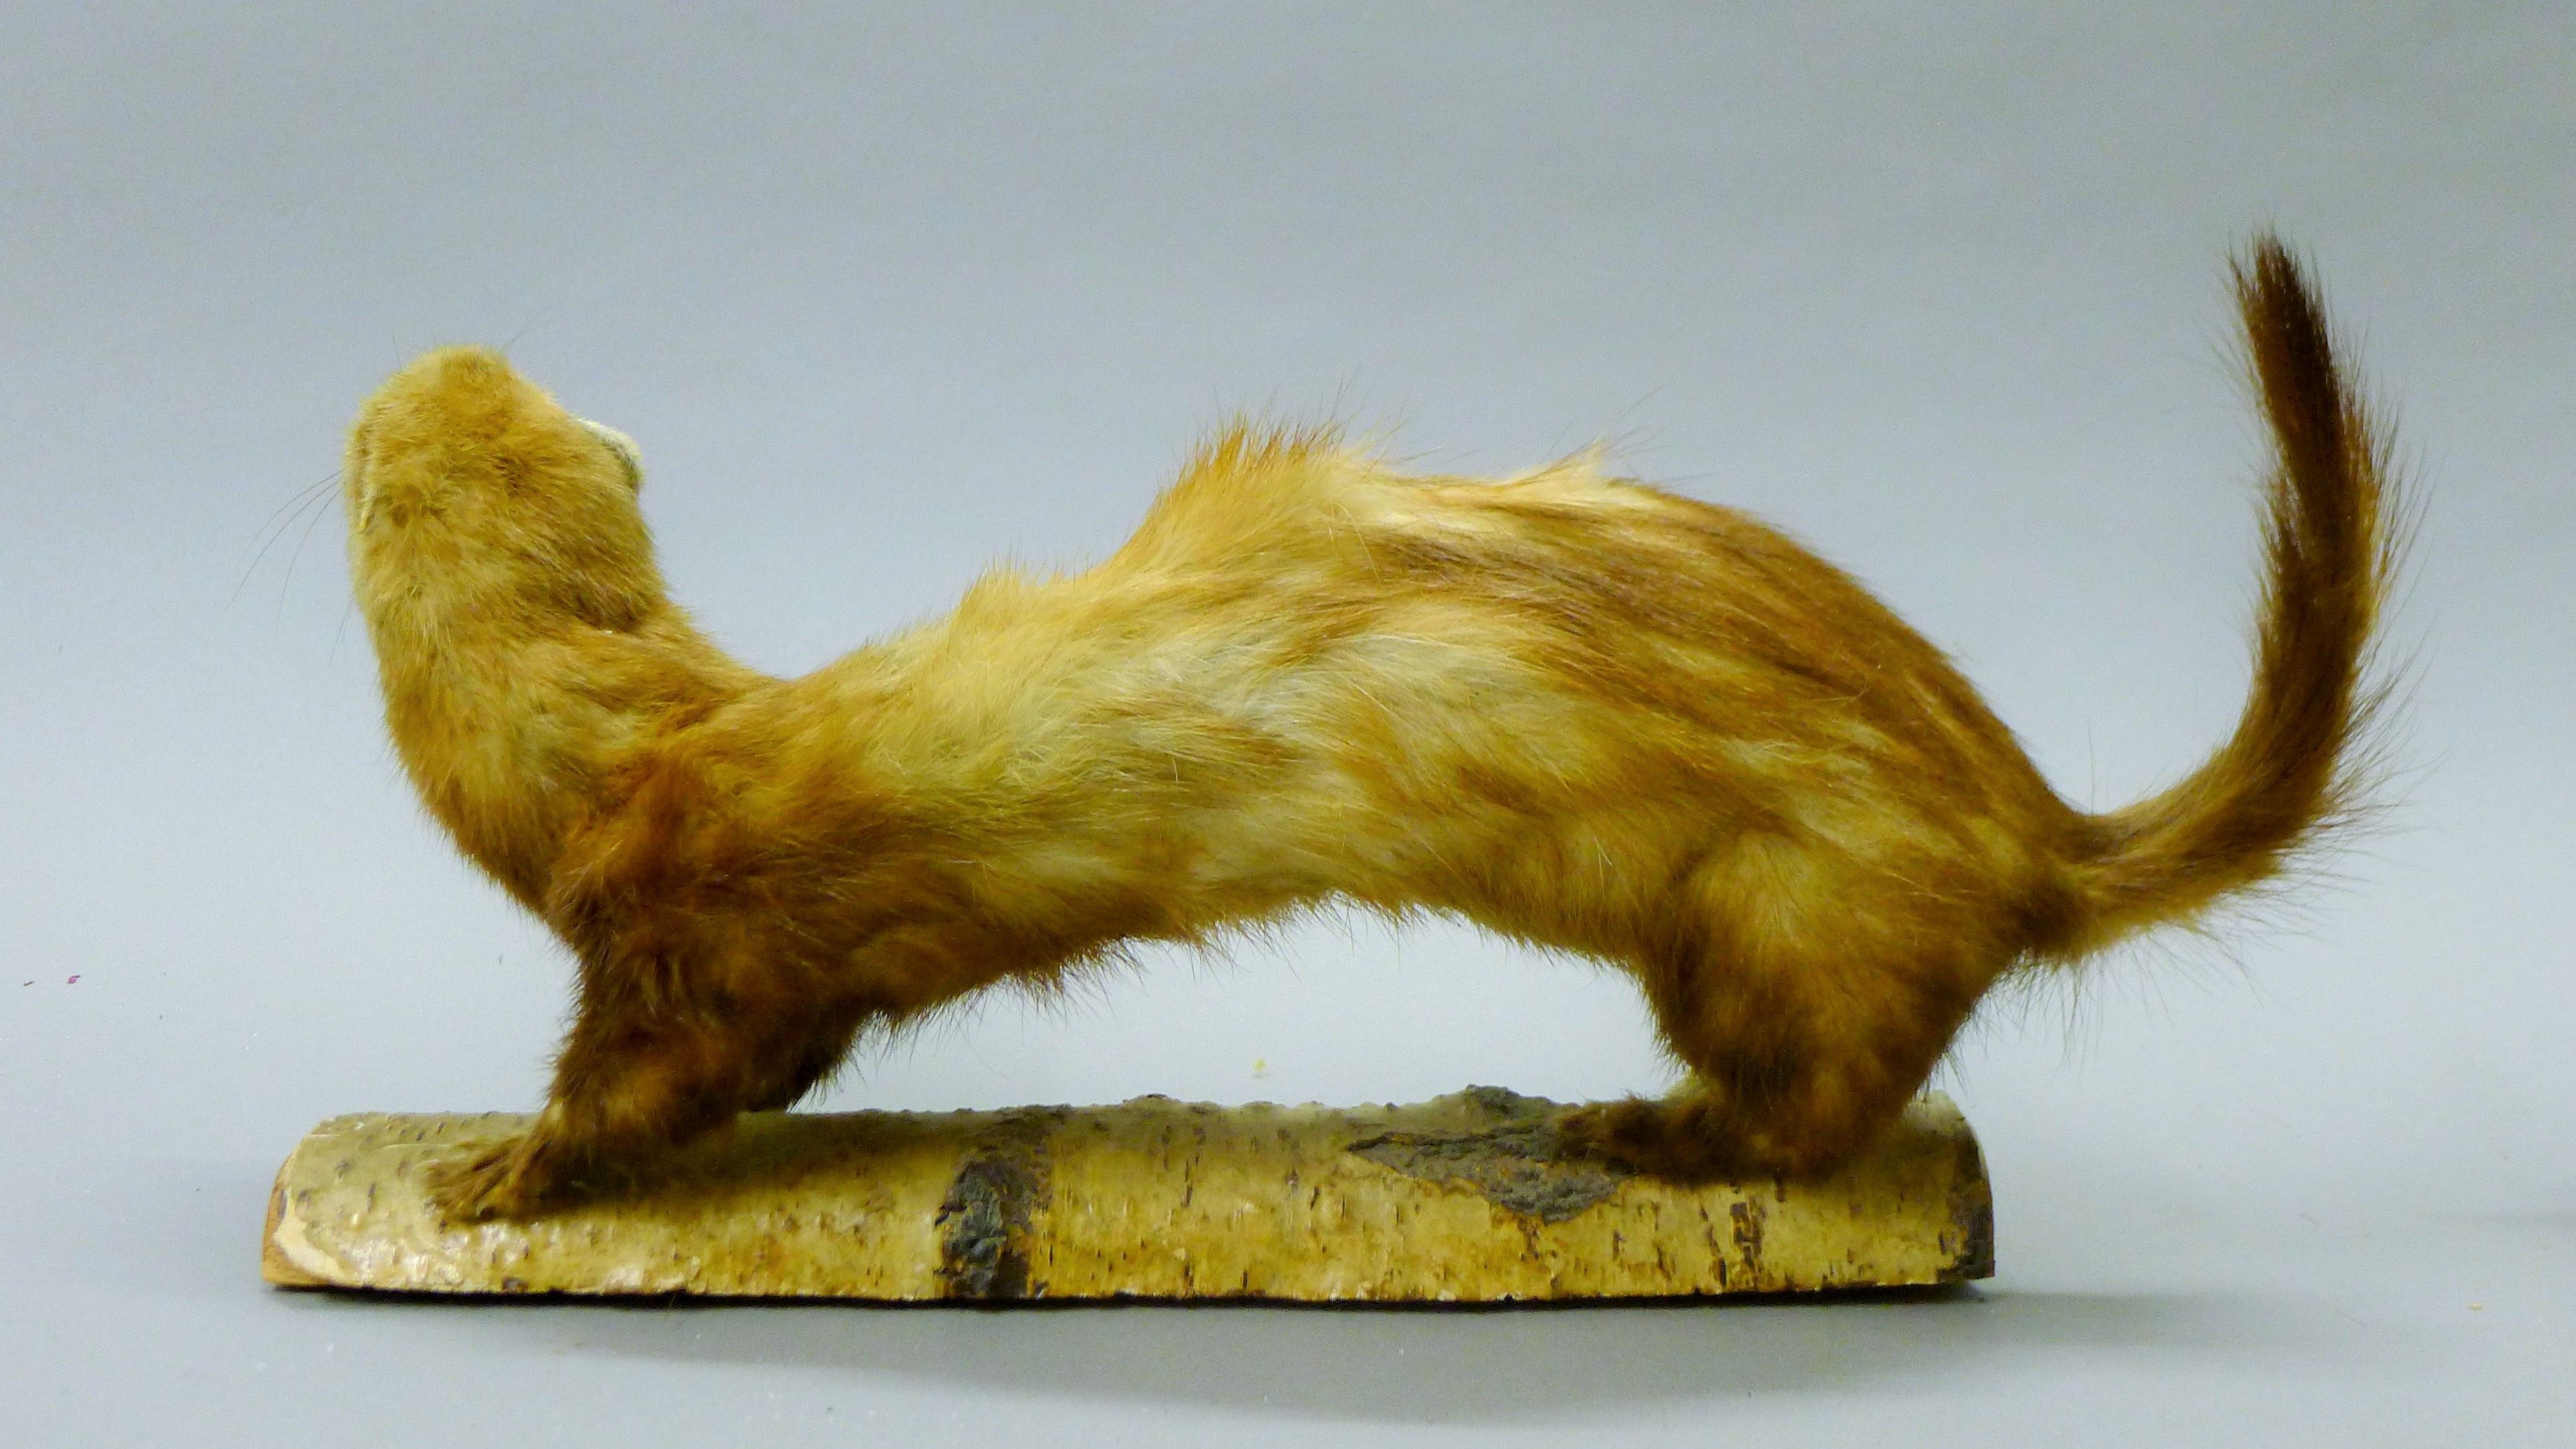 A taxidermy specimen of a preserved stoat (Mustela erminea) and a ferret (Mustela putorius furo). - Image 3 of 5